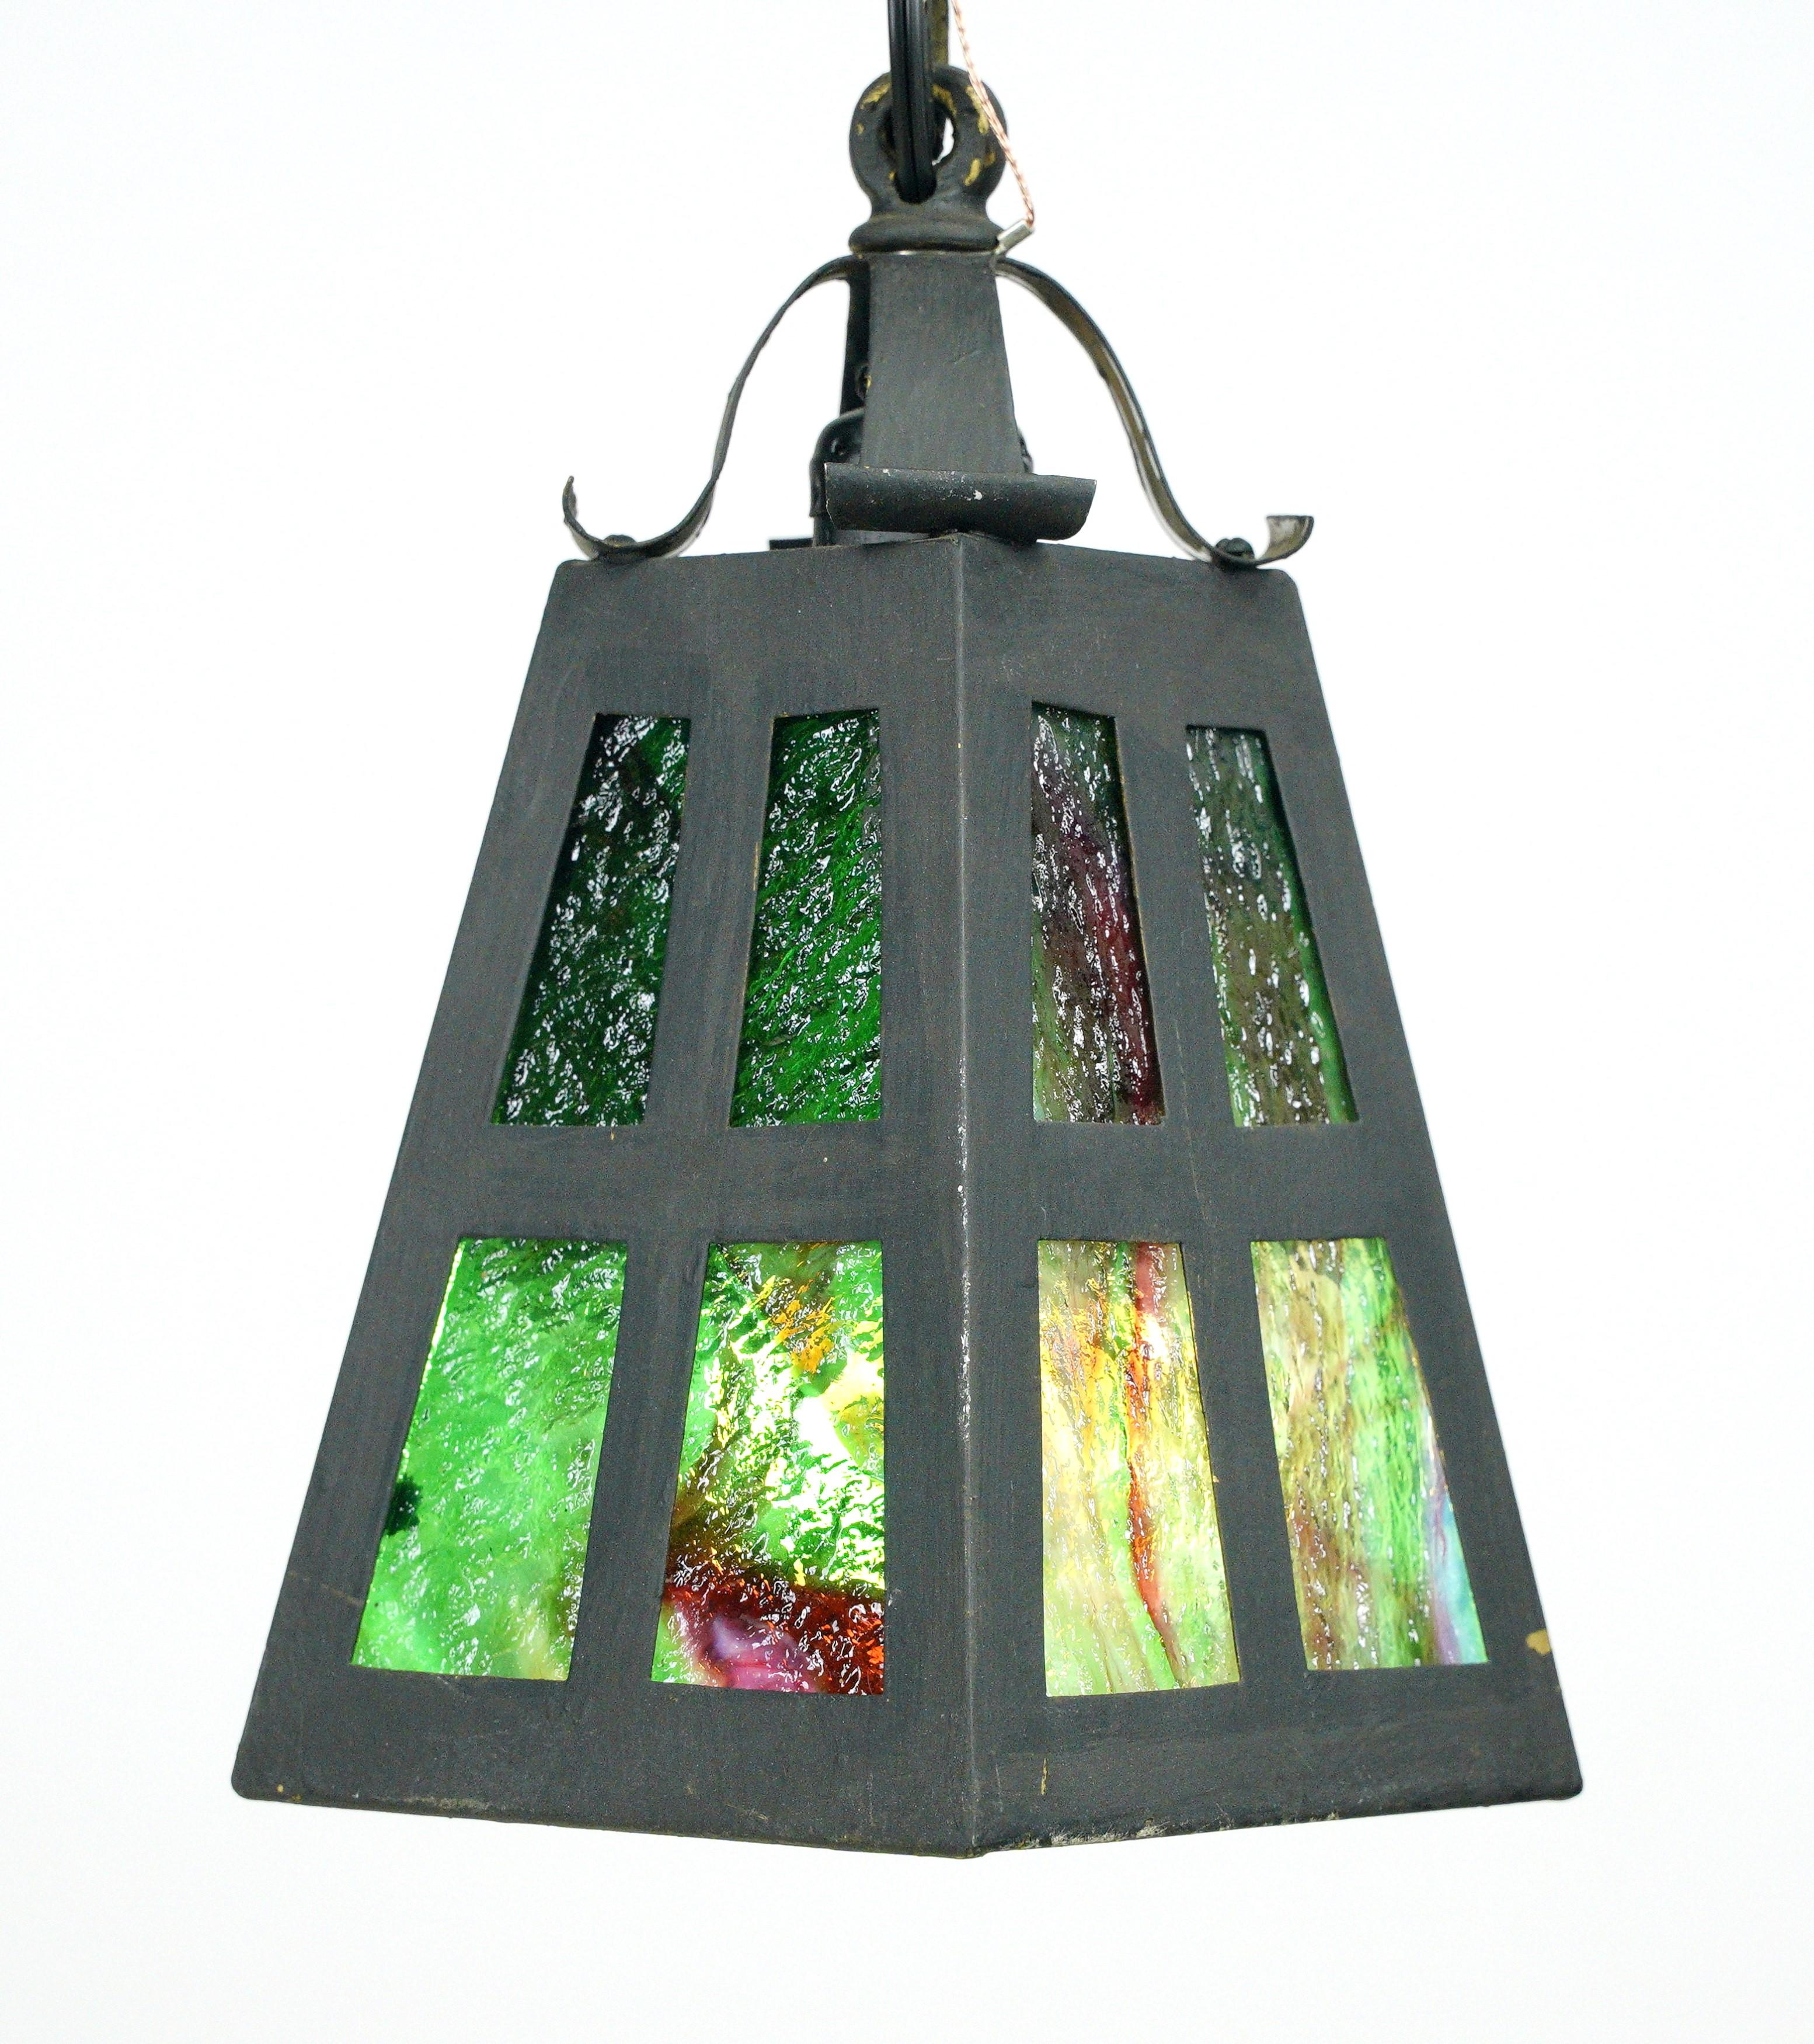 This pendant light has been carefully restored to its former glory, preserving the timeless design and craftsmanship of the 1920s. The fixture features stained glass panels in shades of green and yellow, creating a warm and inviting glow when lit.